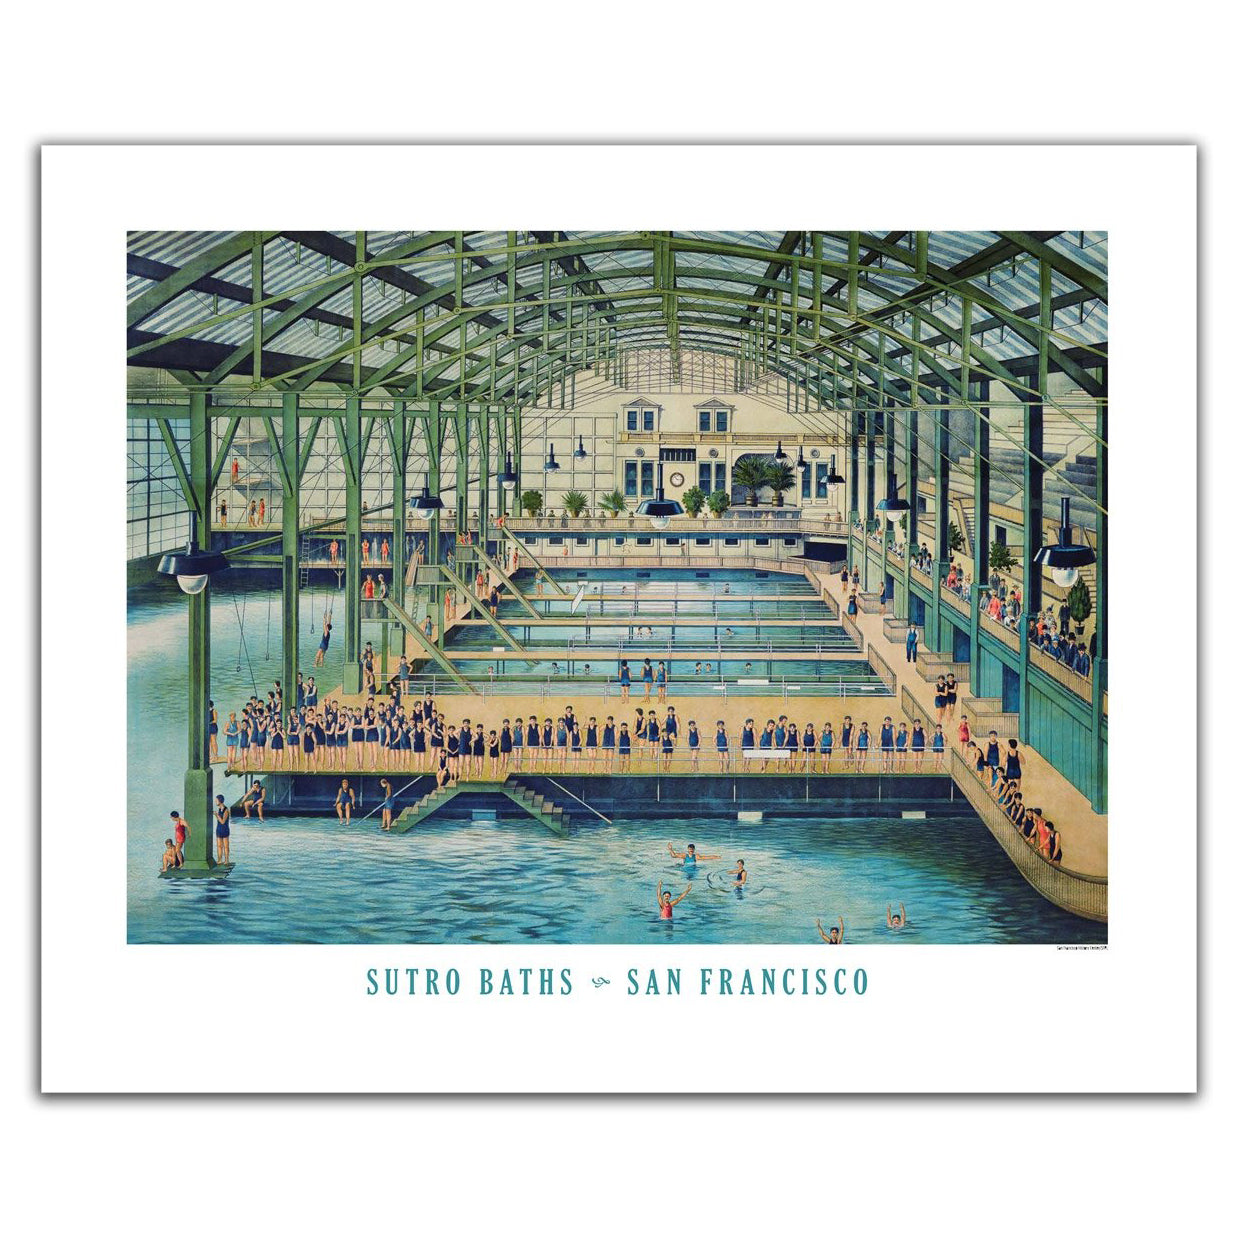 20 x 26 inch Sutro Baths poster, featuring vintage image of San Francisco's famous landmark.